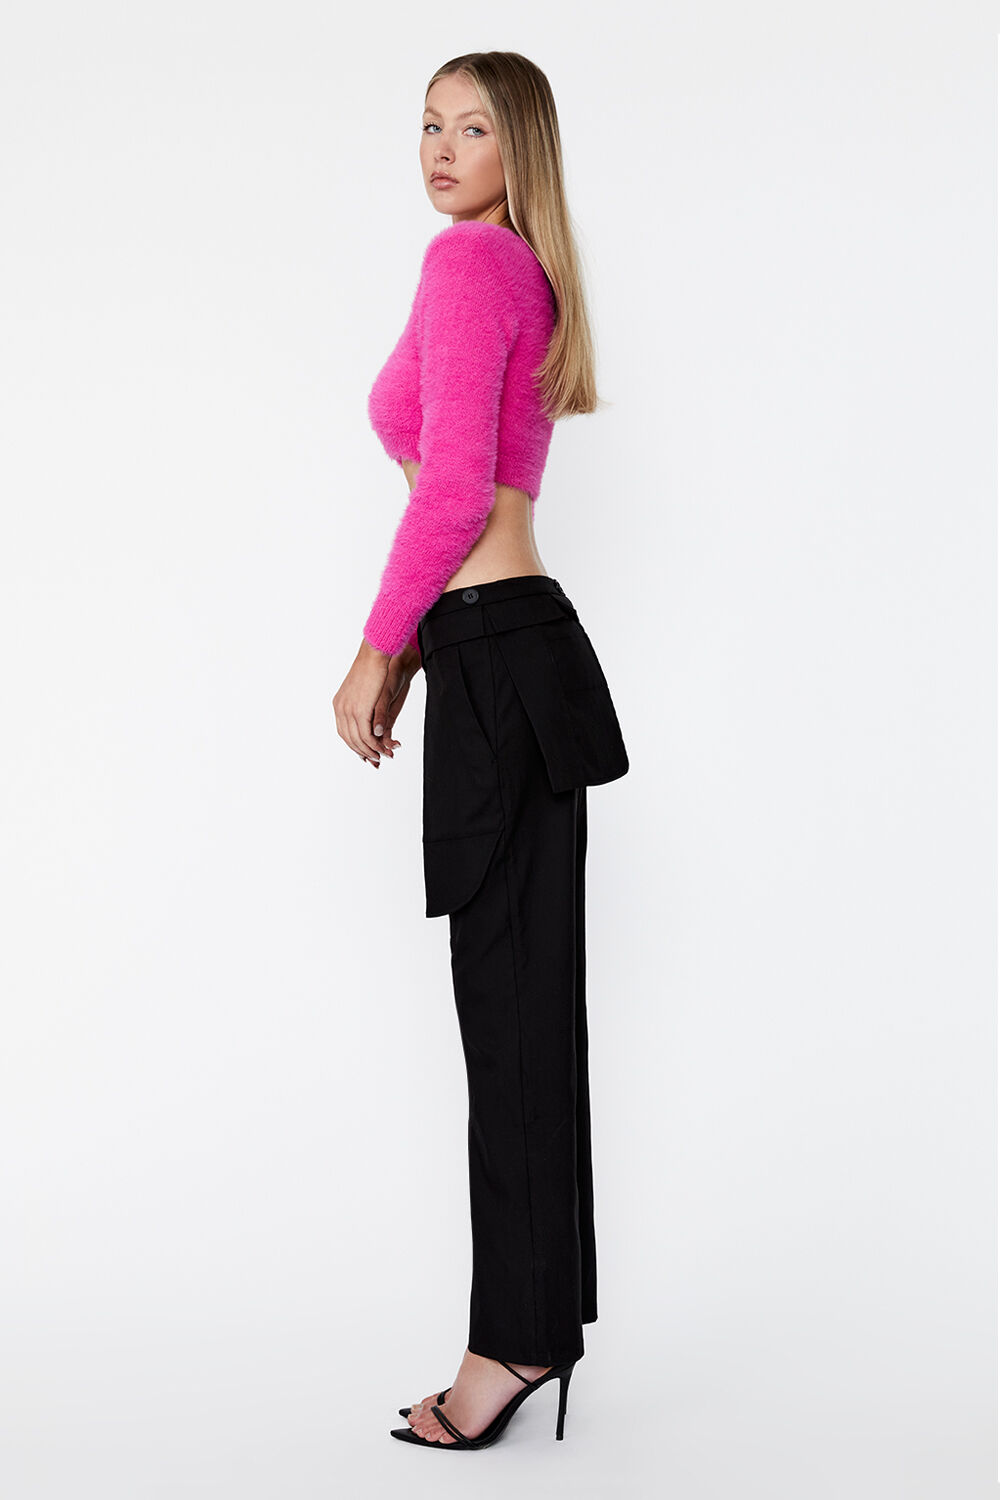 DECONSTRUCTED PANT in colour CAVIAR